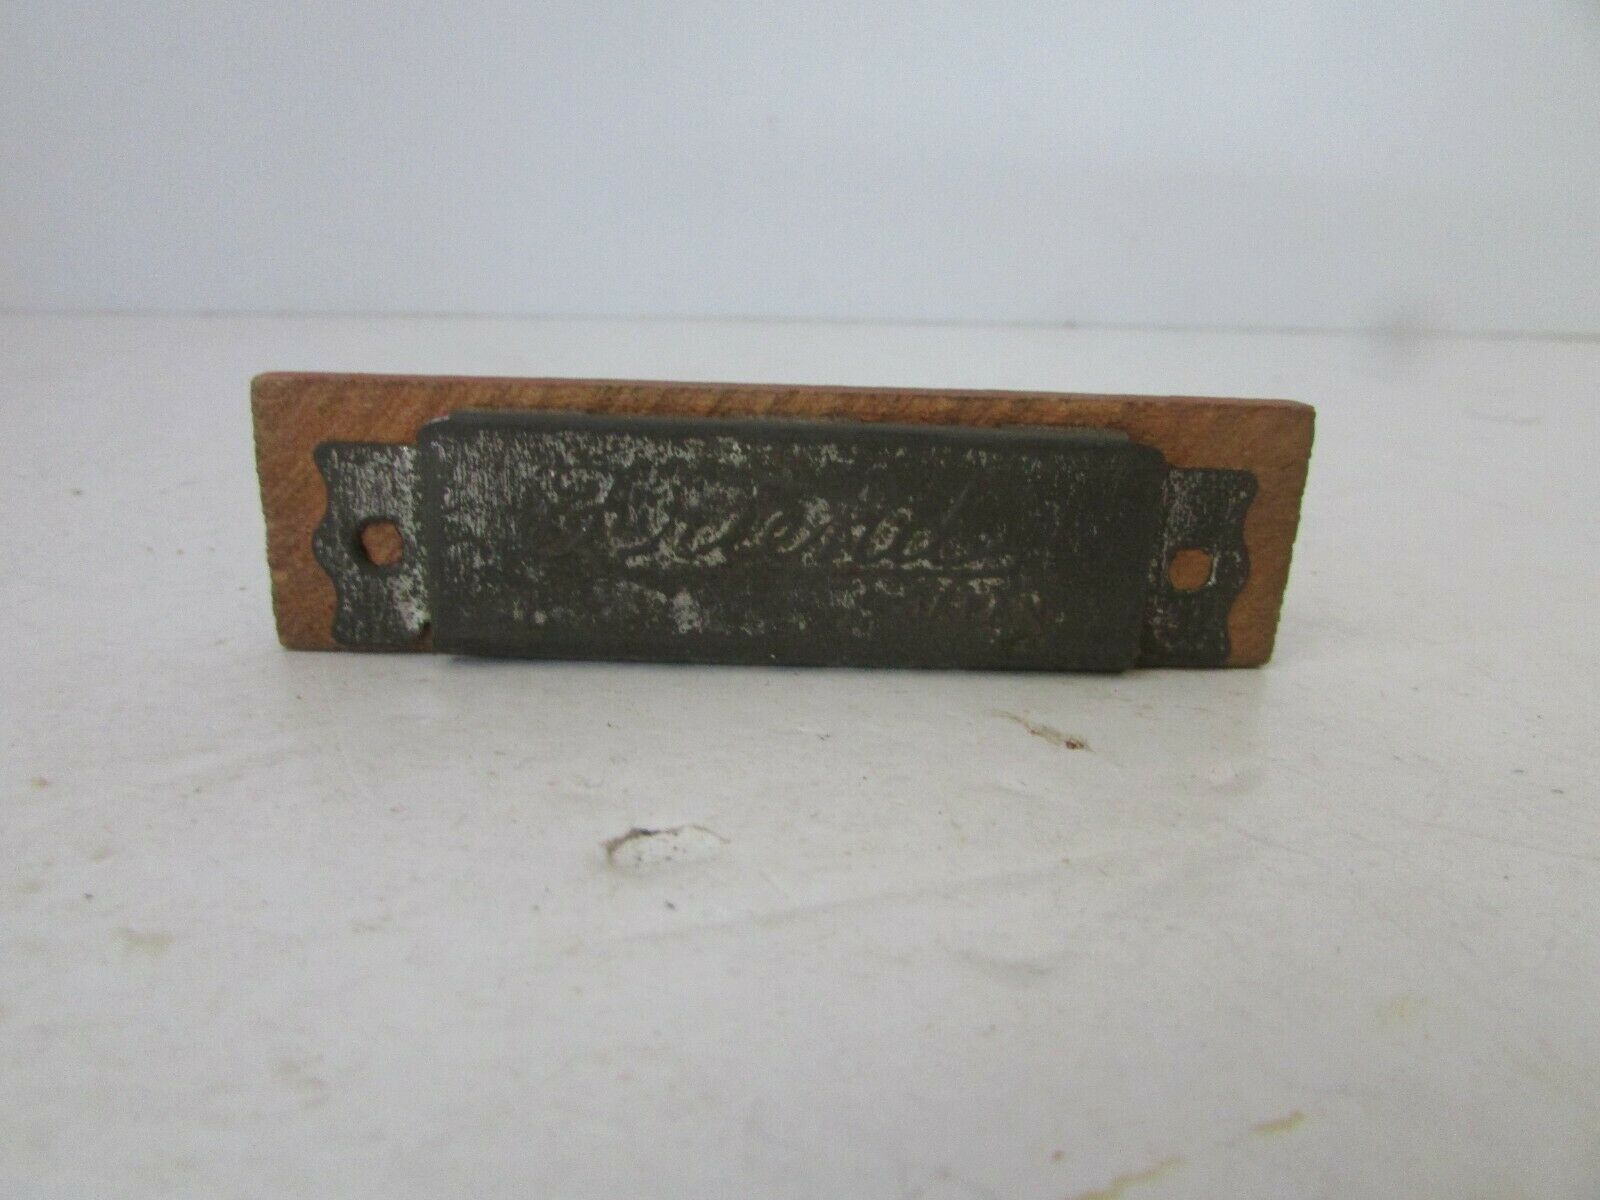 Primary image for VINTAGE HARMONICA WOOD & METAL FRIENDS FROM JAPAN 3.25"L AS IS